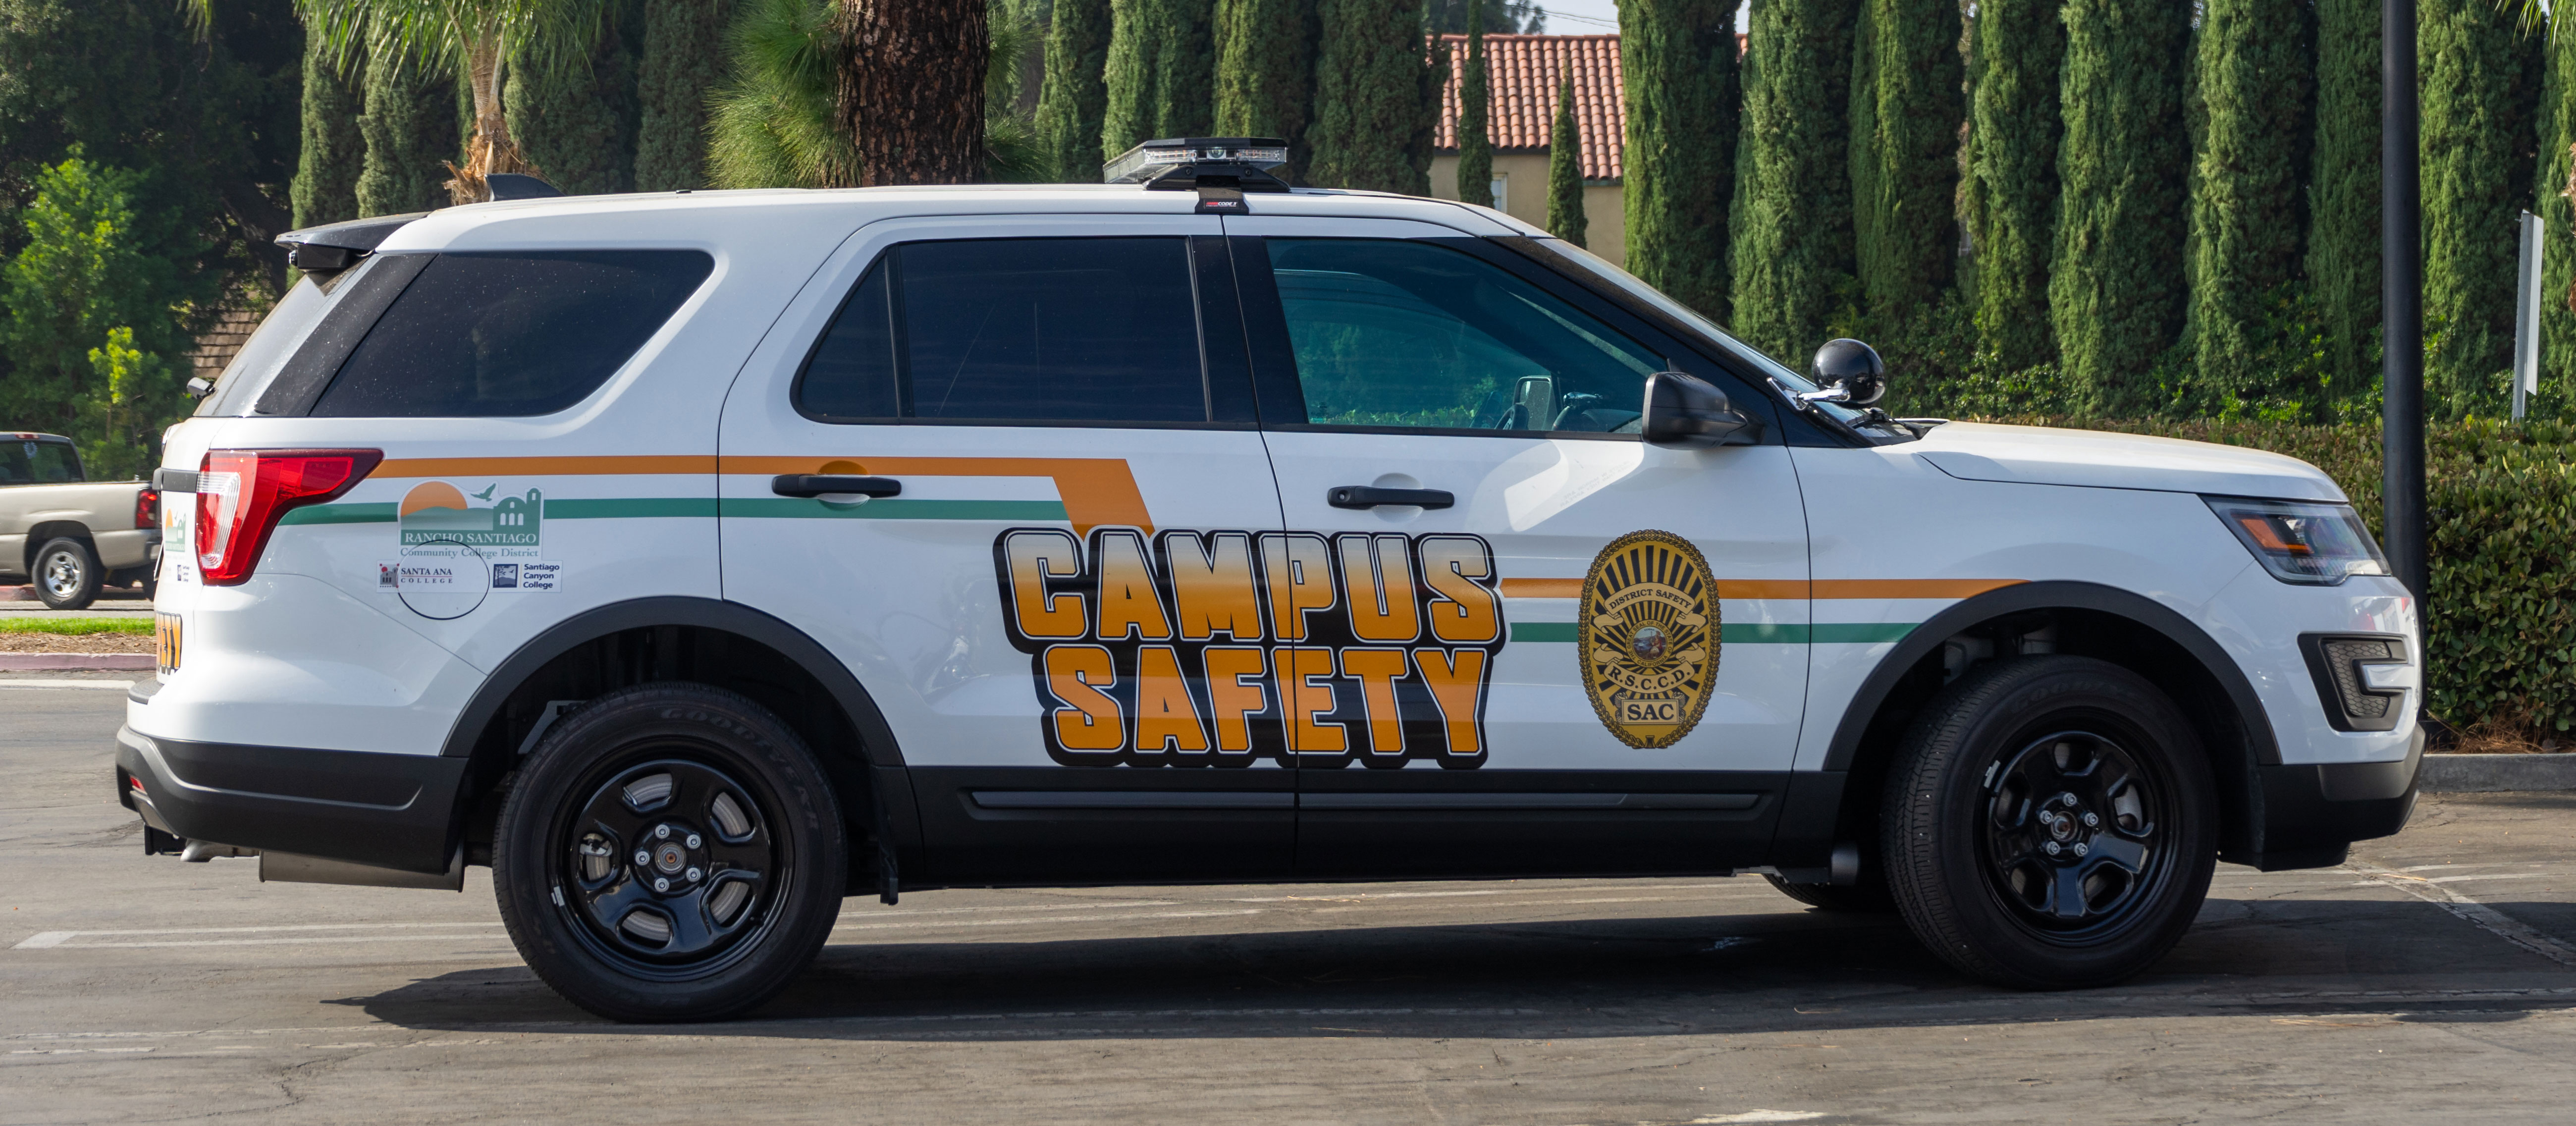 Empty white campus security SUV in parking lot near trees